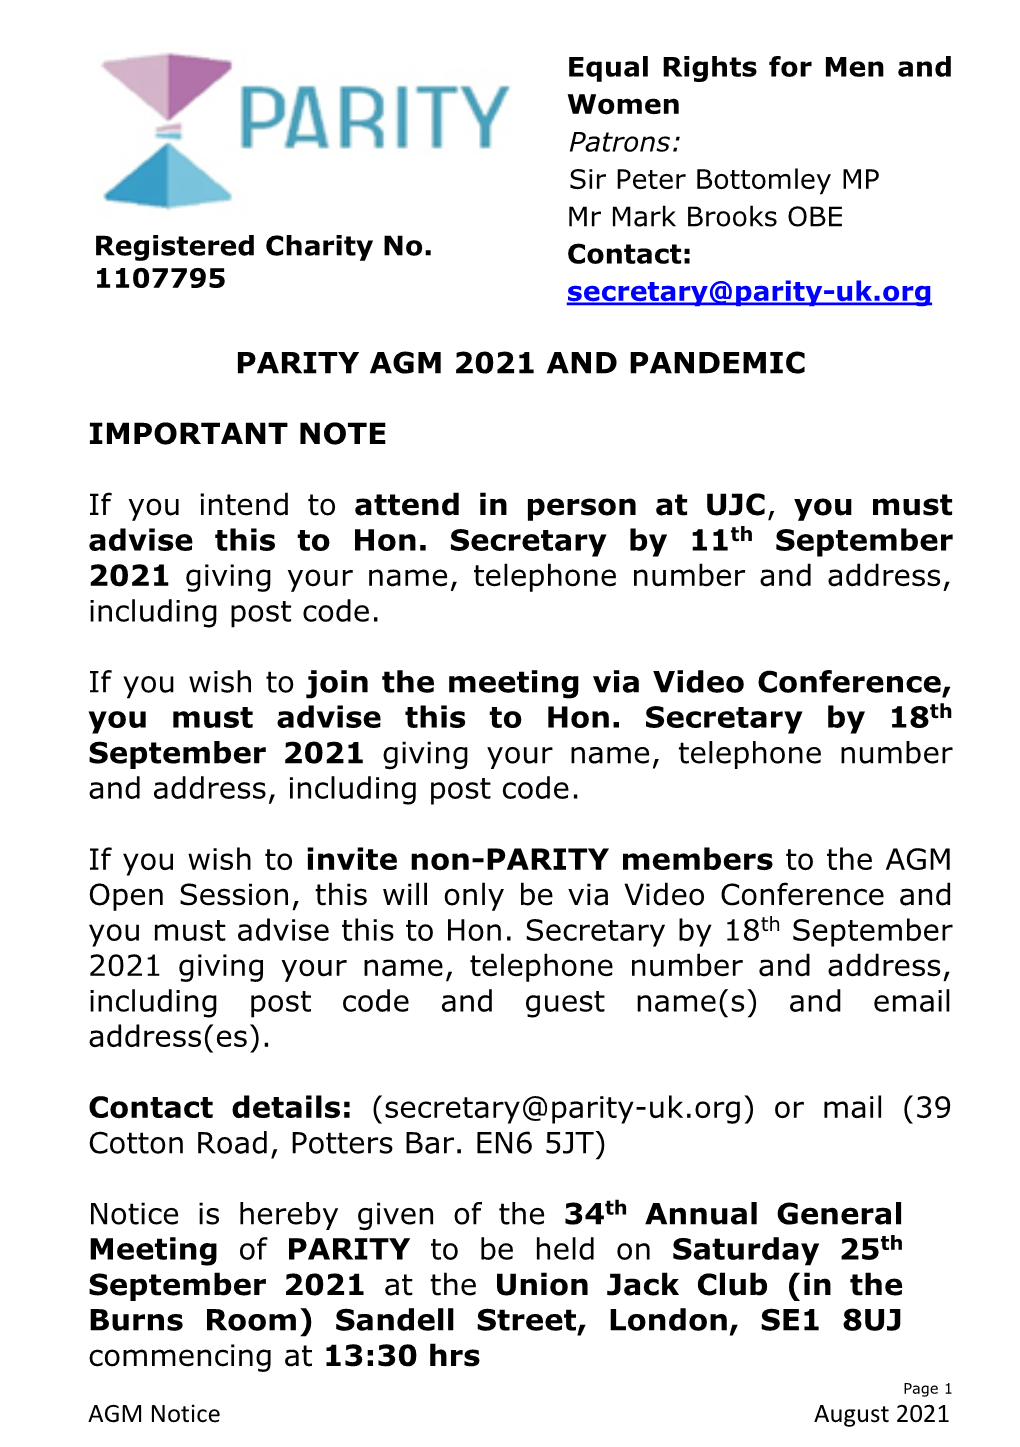 AGM Notice August 2021 PROGRAMME of MEETINGS